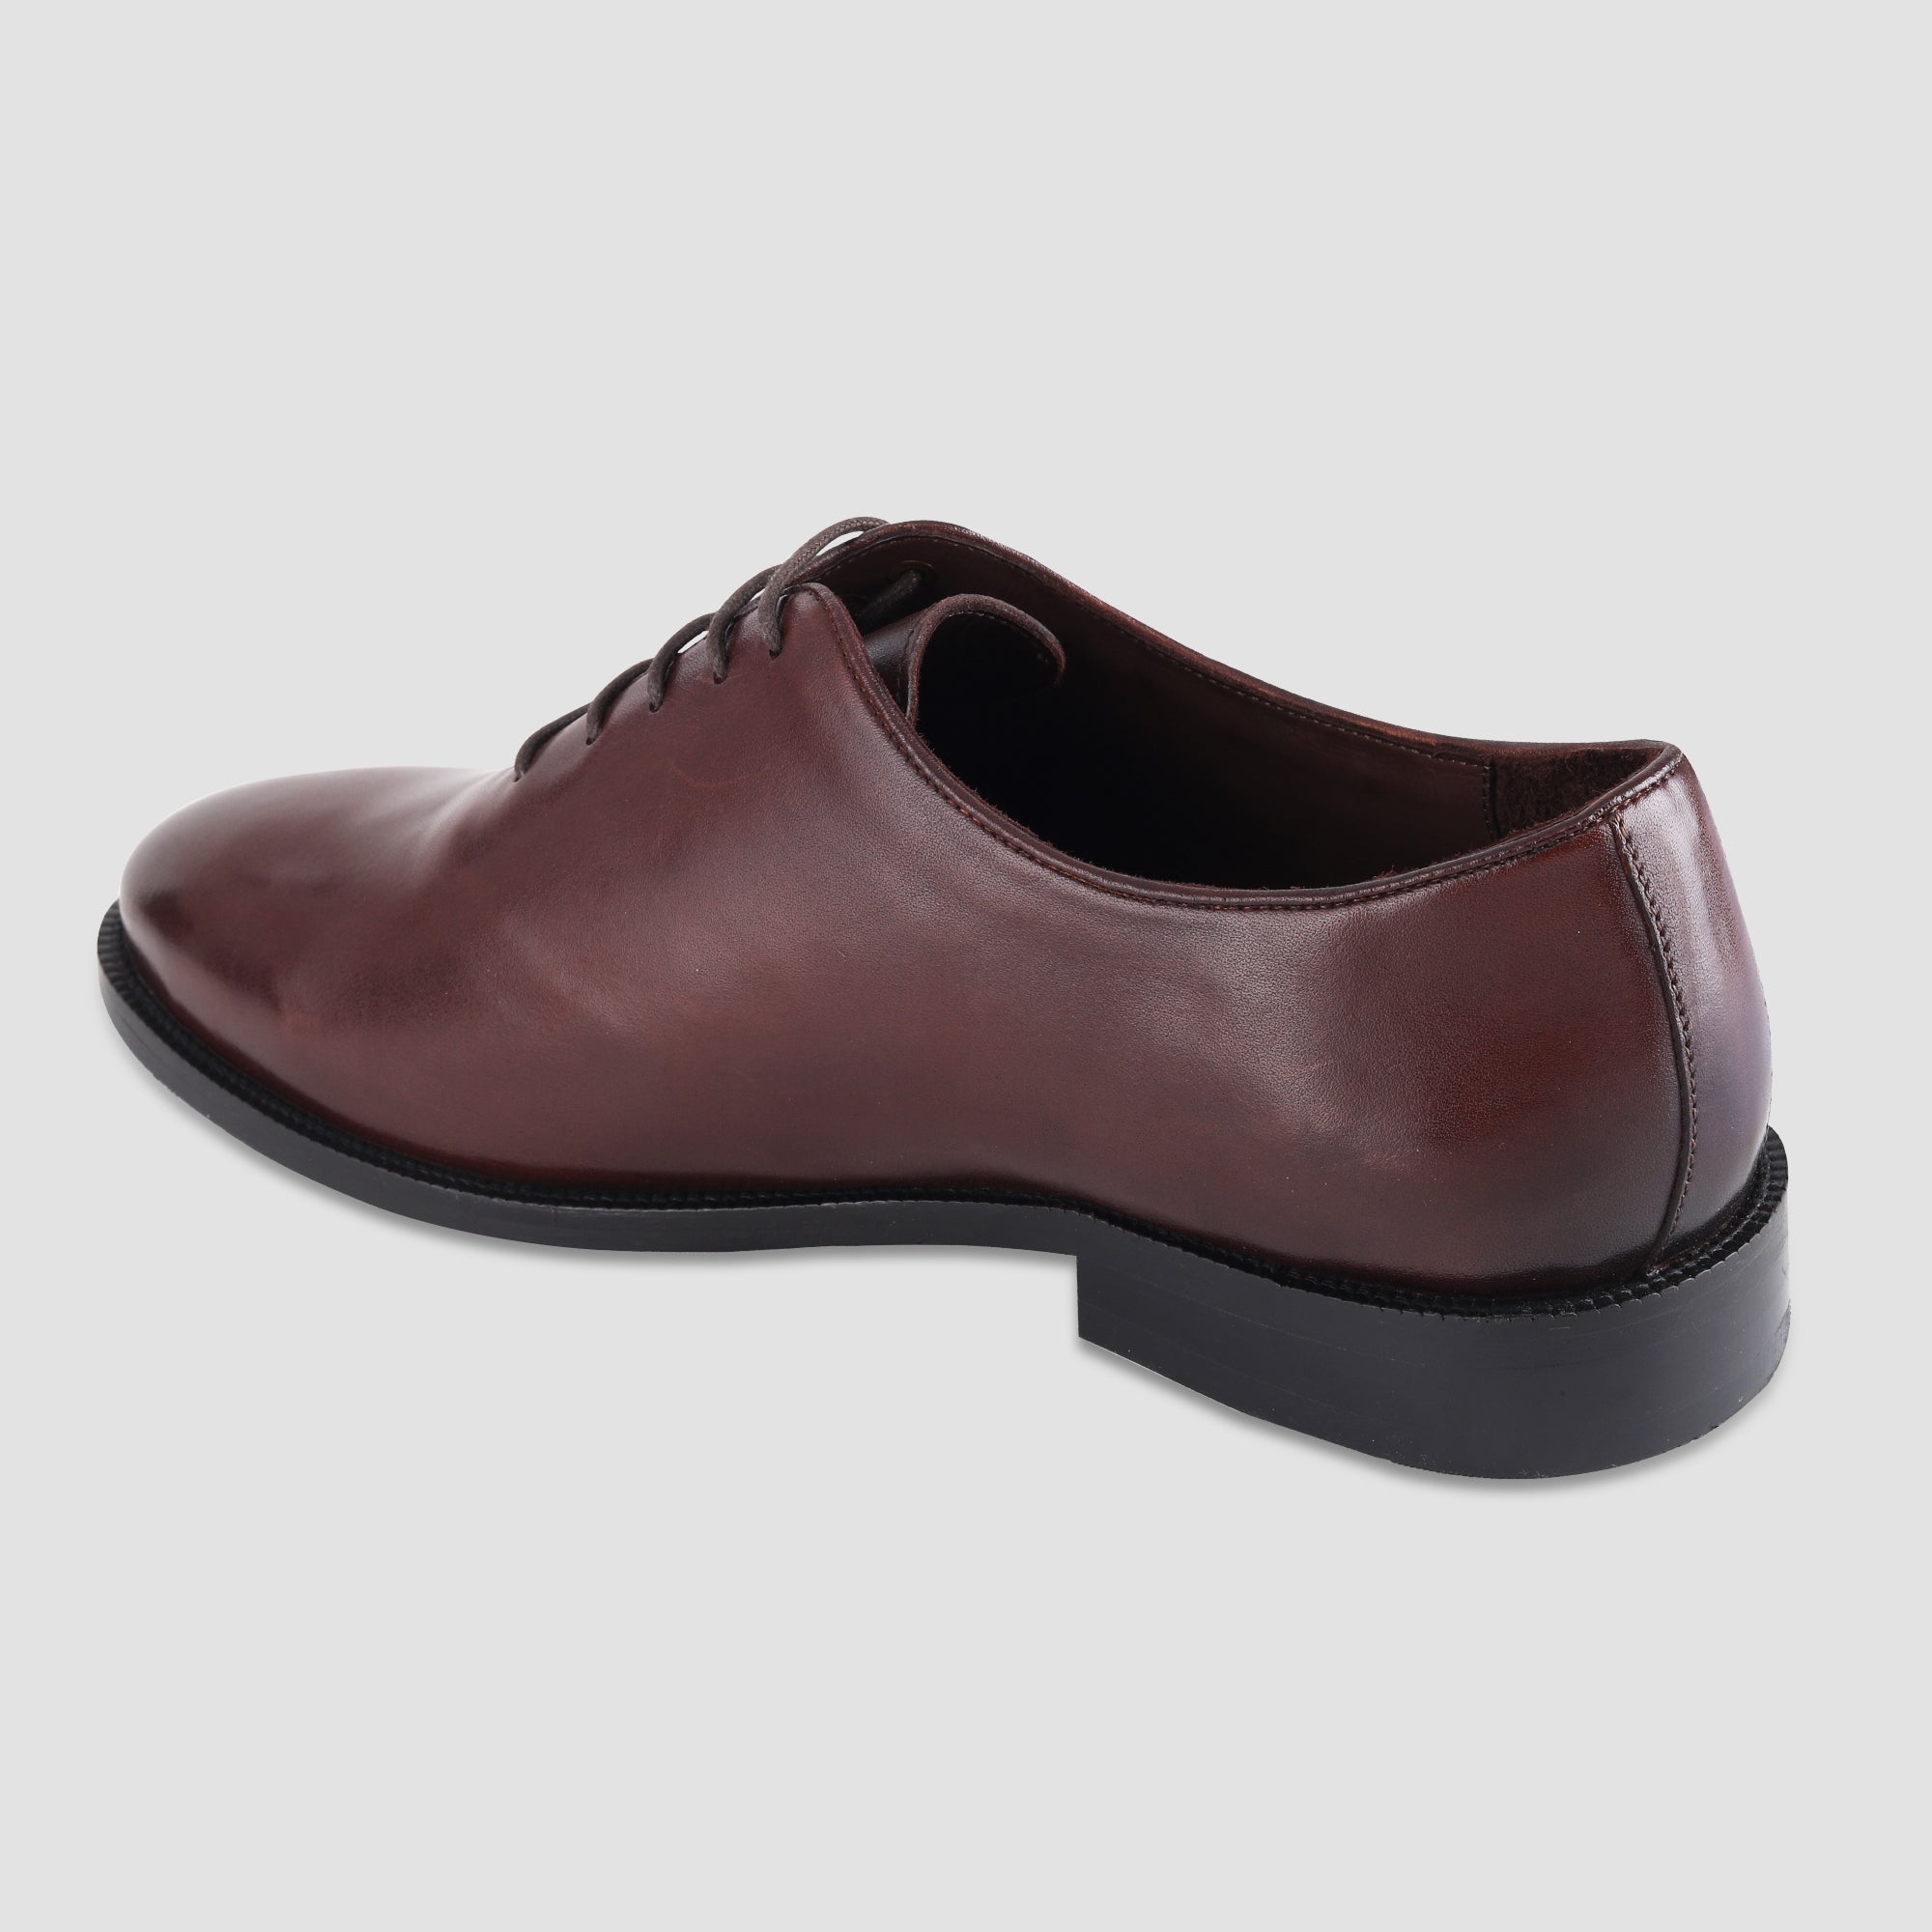 Ezok Brown Leather Formal Shoes For Men